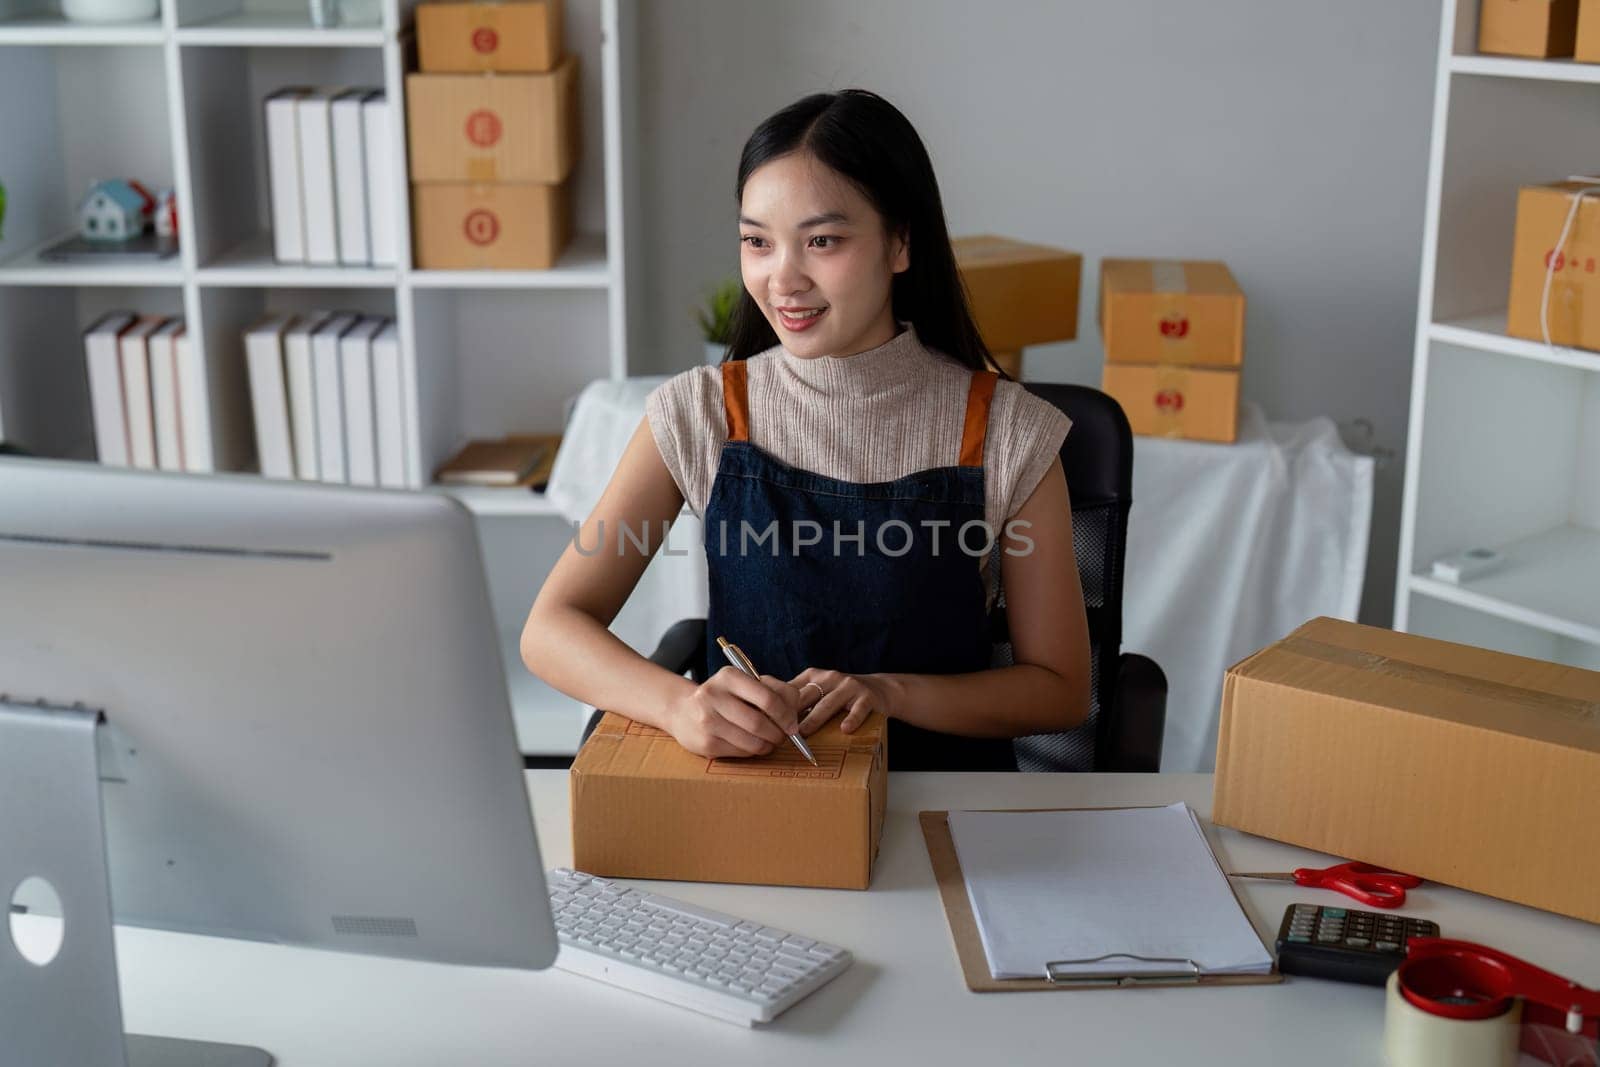 Woman asian in an online store check the customer address and package information on box. Online shopping concept.